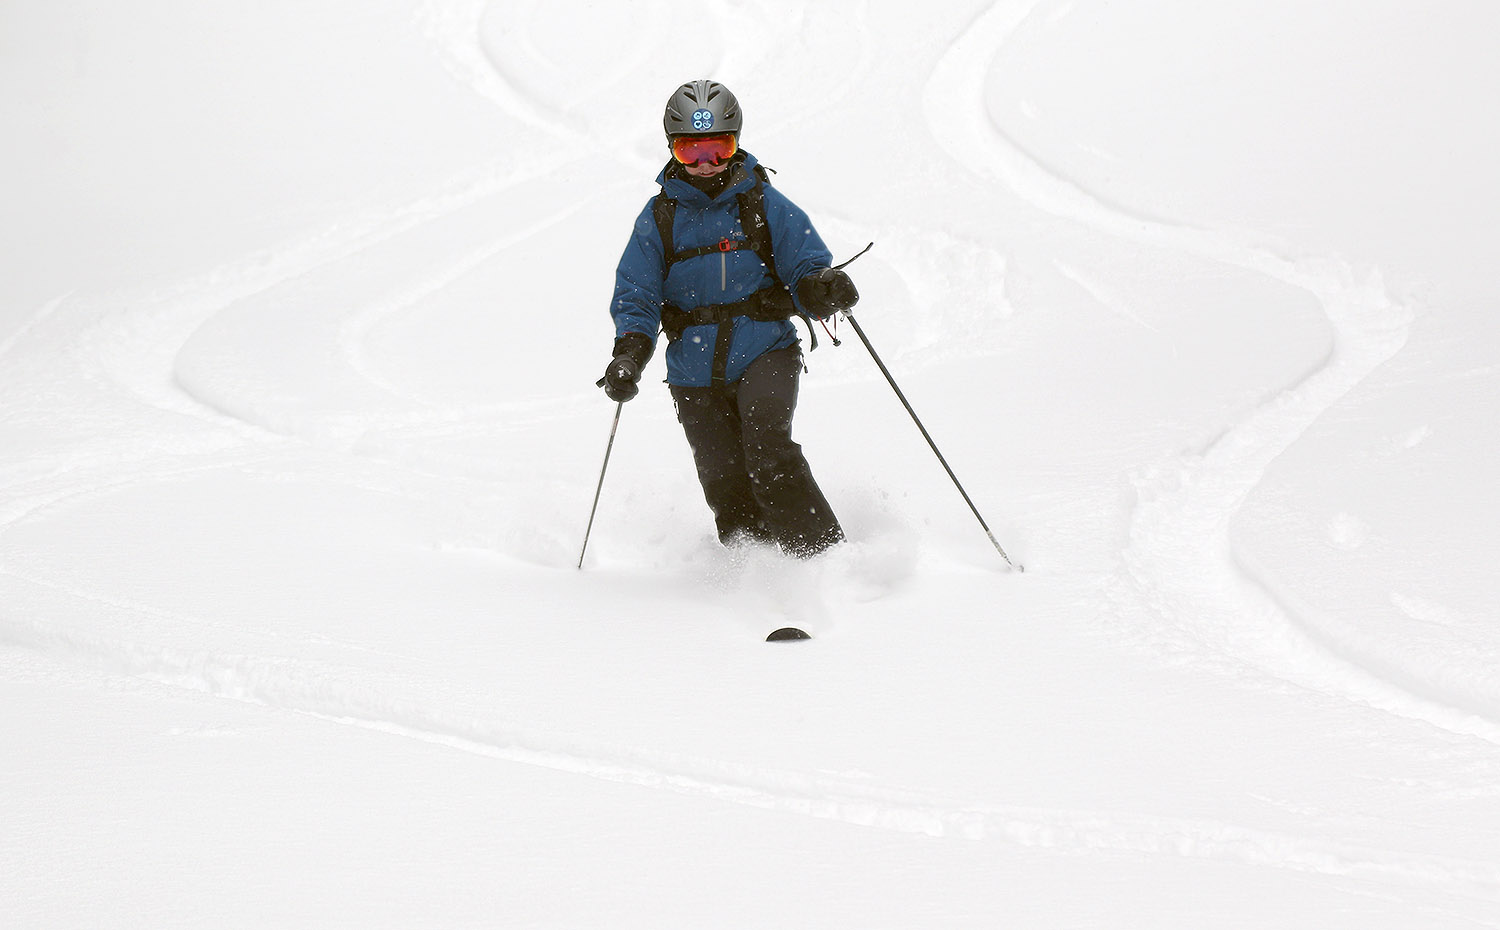 An image of Erica Telemark skiing on powder during an April snowstorm at Bolton Valley Ski Resort in Vermont